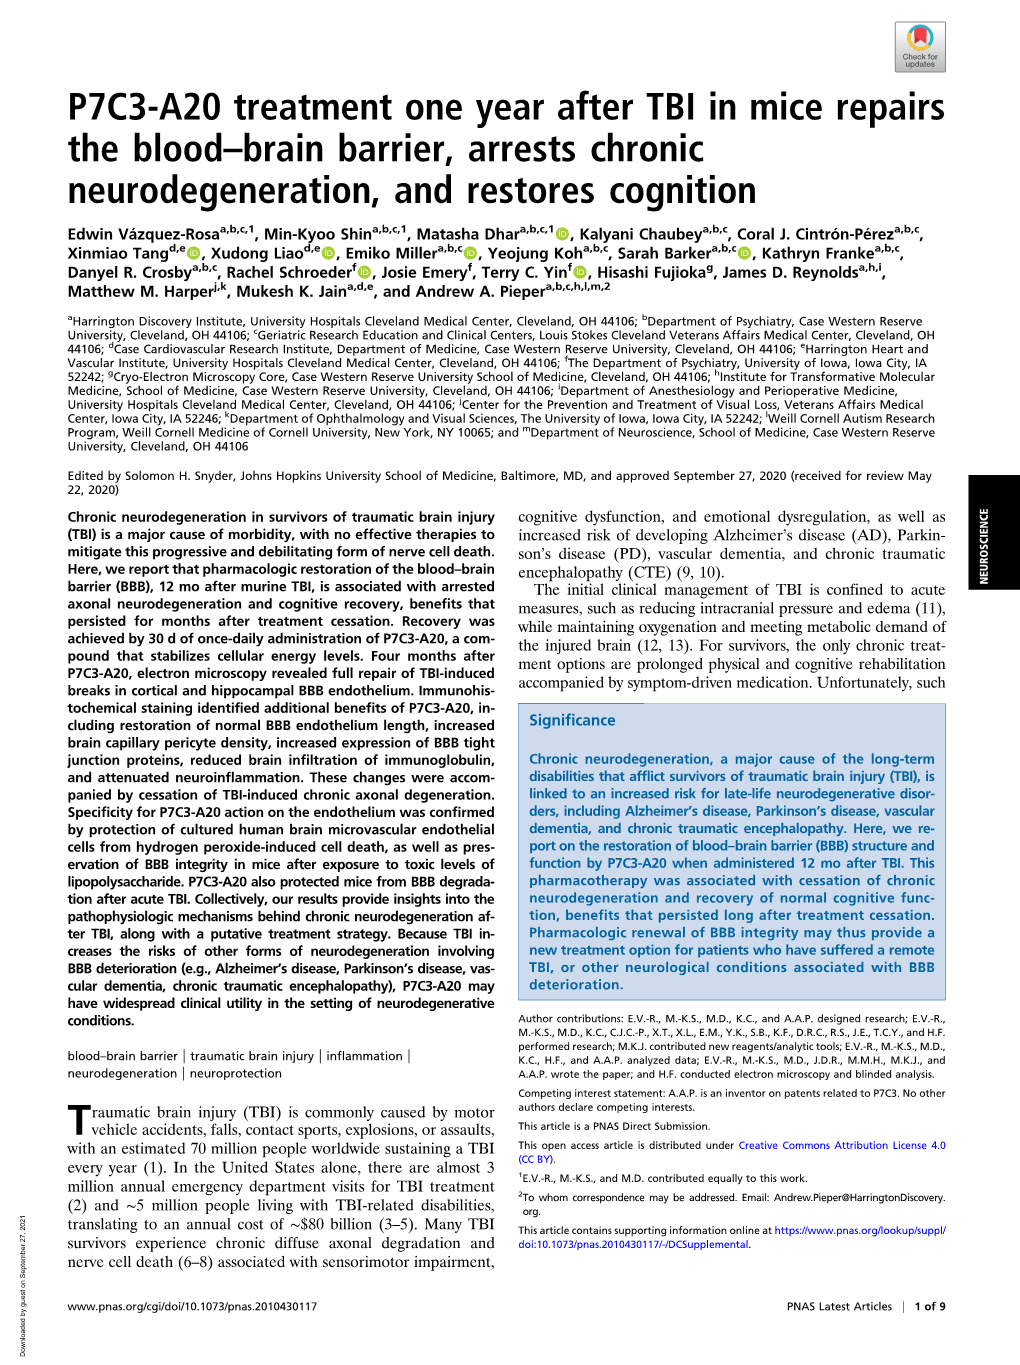 P7C3-A20 Treatment One Year After TBI in Mice Repairs the Blood–Brain Barrier, Arrests Chronic Neurodegeneration, and Restores Cognition